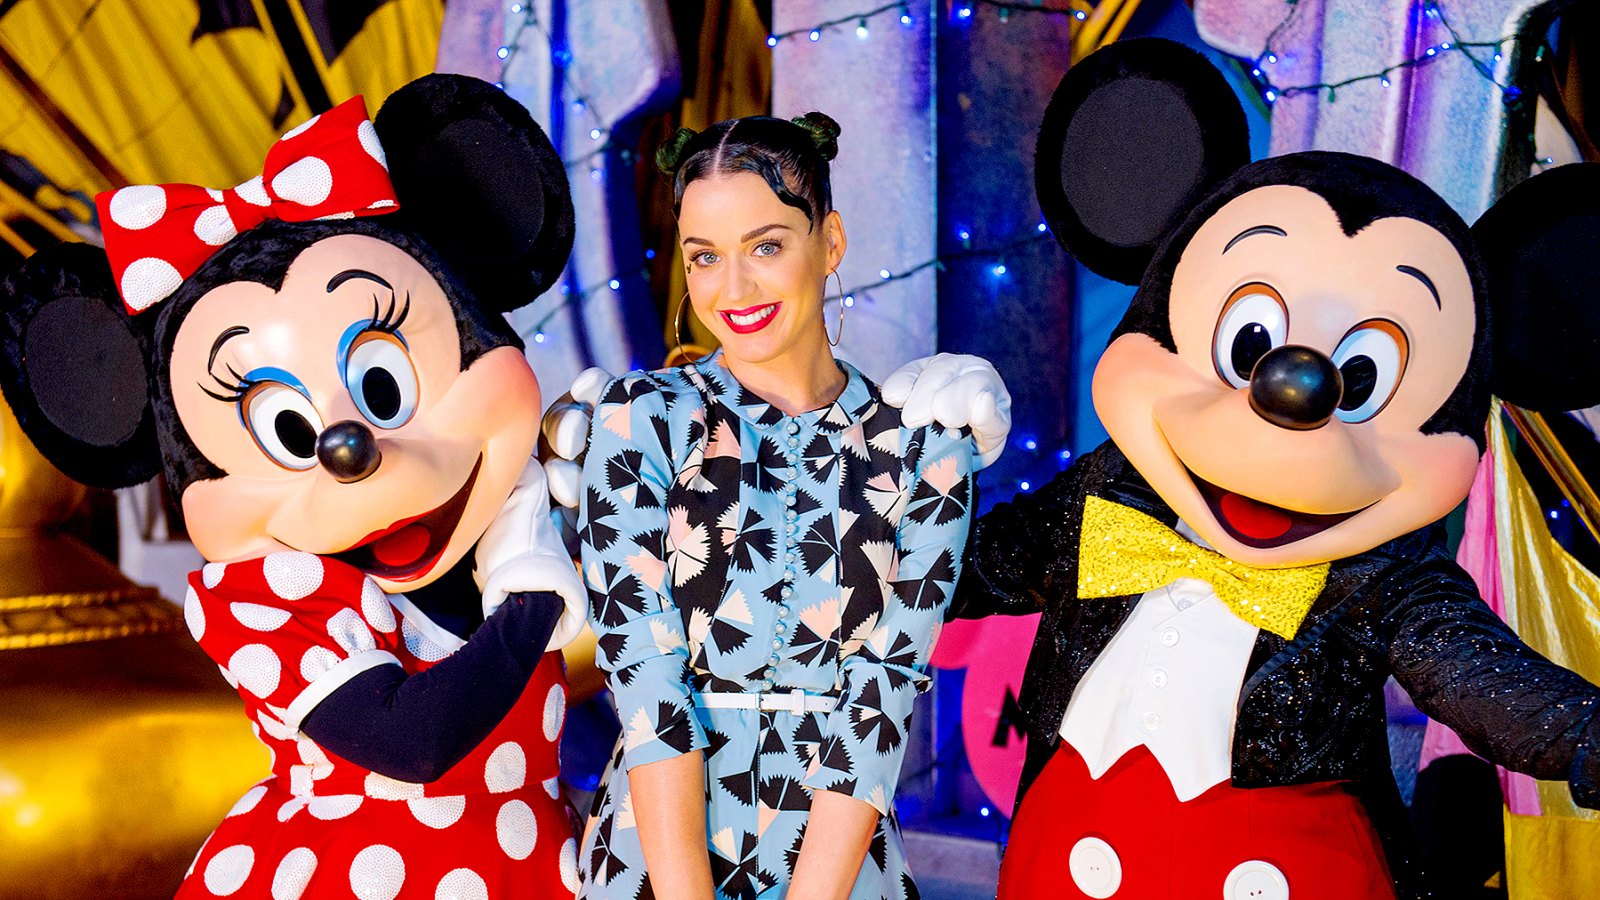 Katy Perry poses with Minnie Mouse and Mickey Mouse at Disney's Hollywood Studios at Walt Disney World Resort on July 4, 2014 in Lake Buena Vista, Florida.